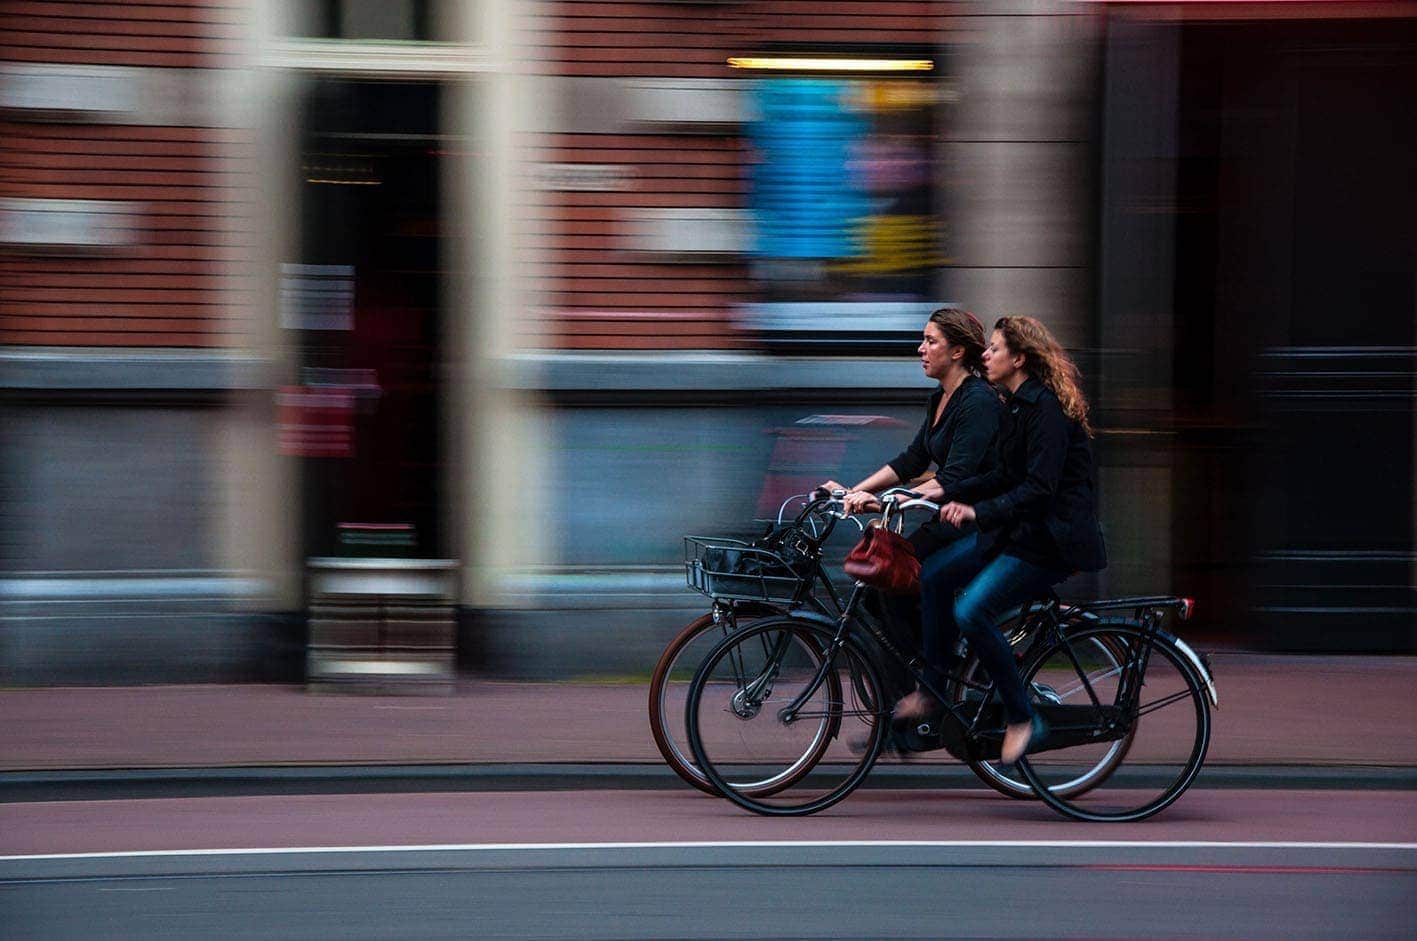 Image of two women riding a bicycle